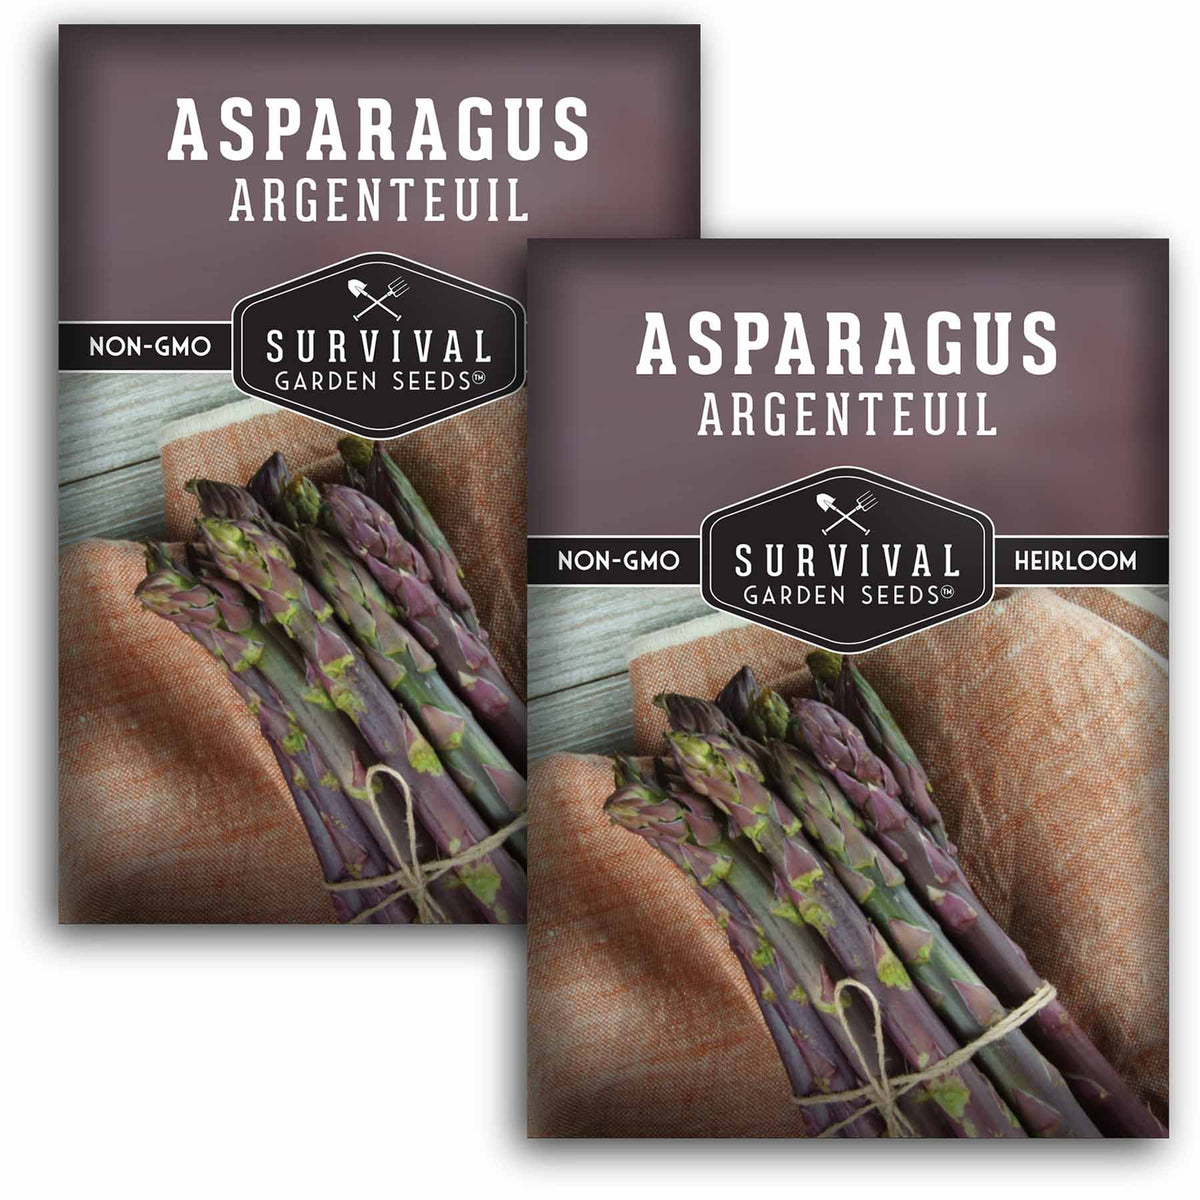 2 packets of Argenteuil Asparagus seeds